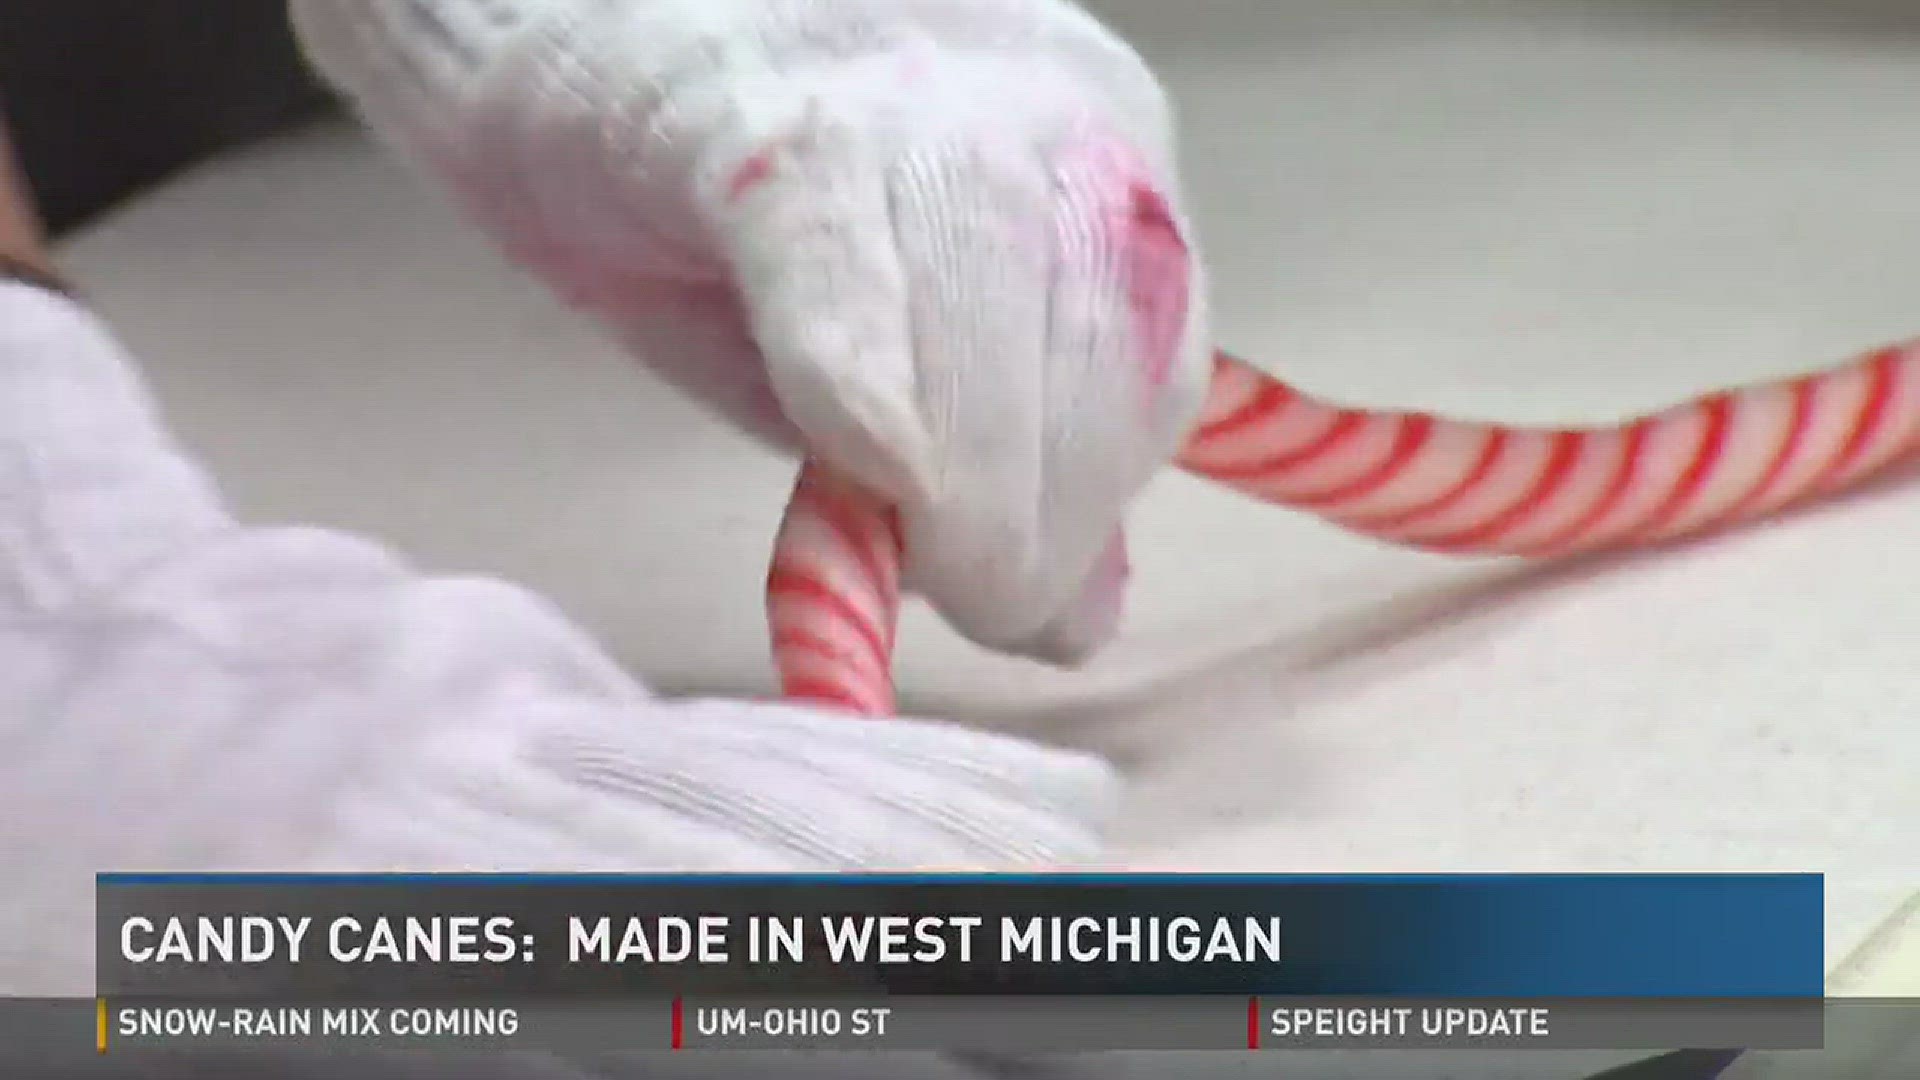 Today, Grand Rapids-area Sweetland candies started making candy canes.